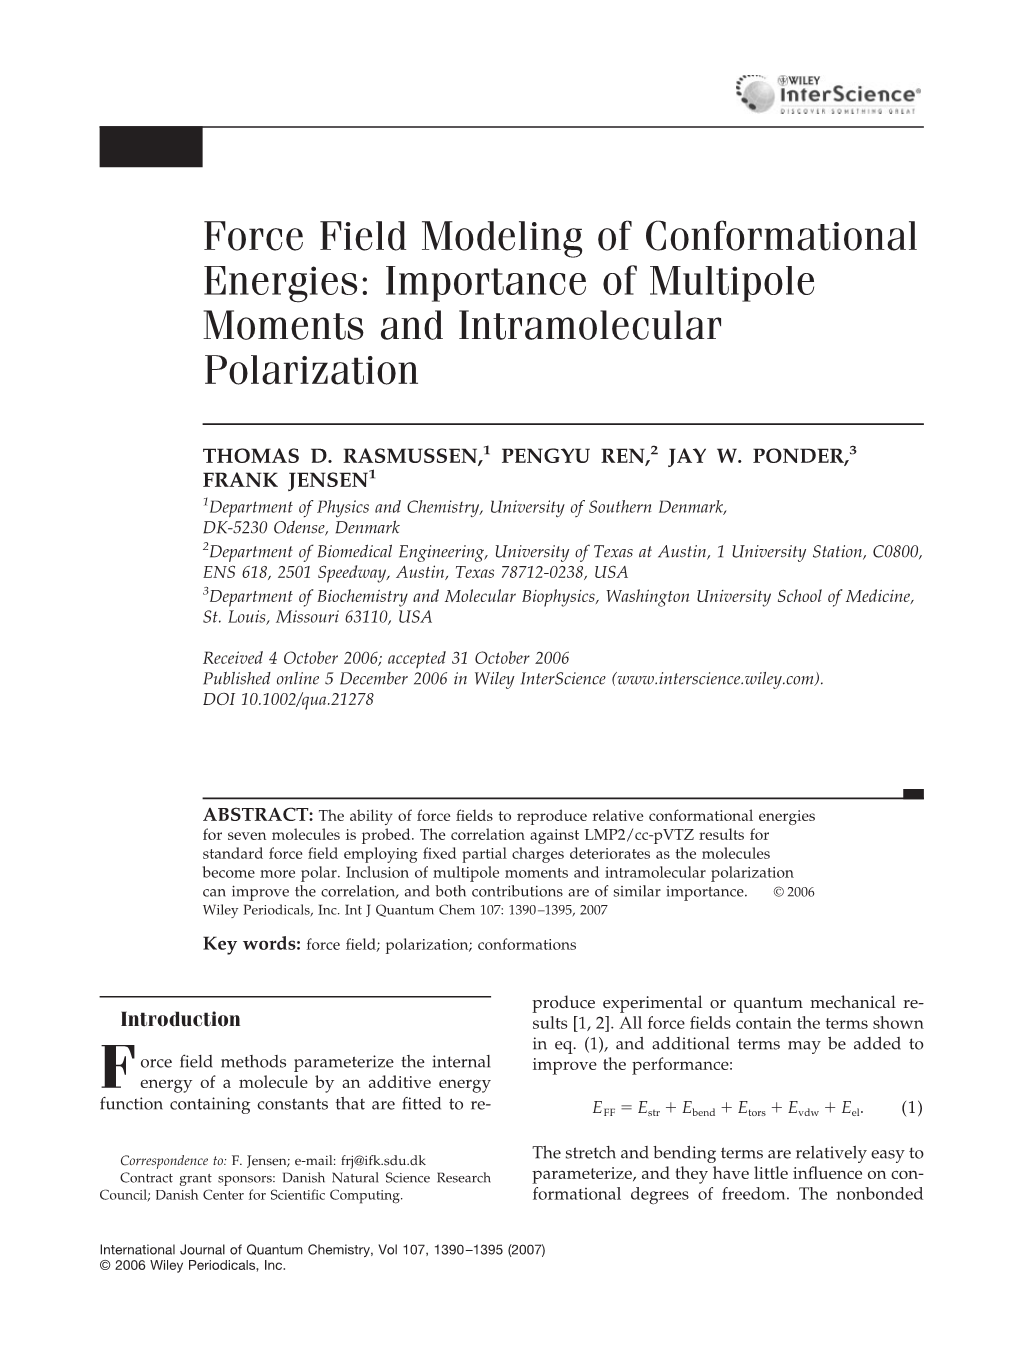 Force Field Modeling of Conformational Energies: Importance of Multipole Moments and Intramolecular Polarization